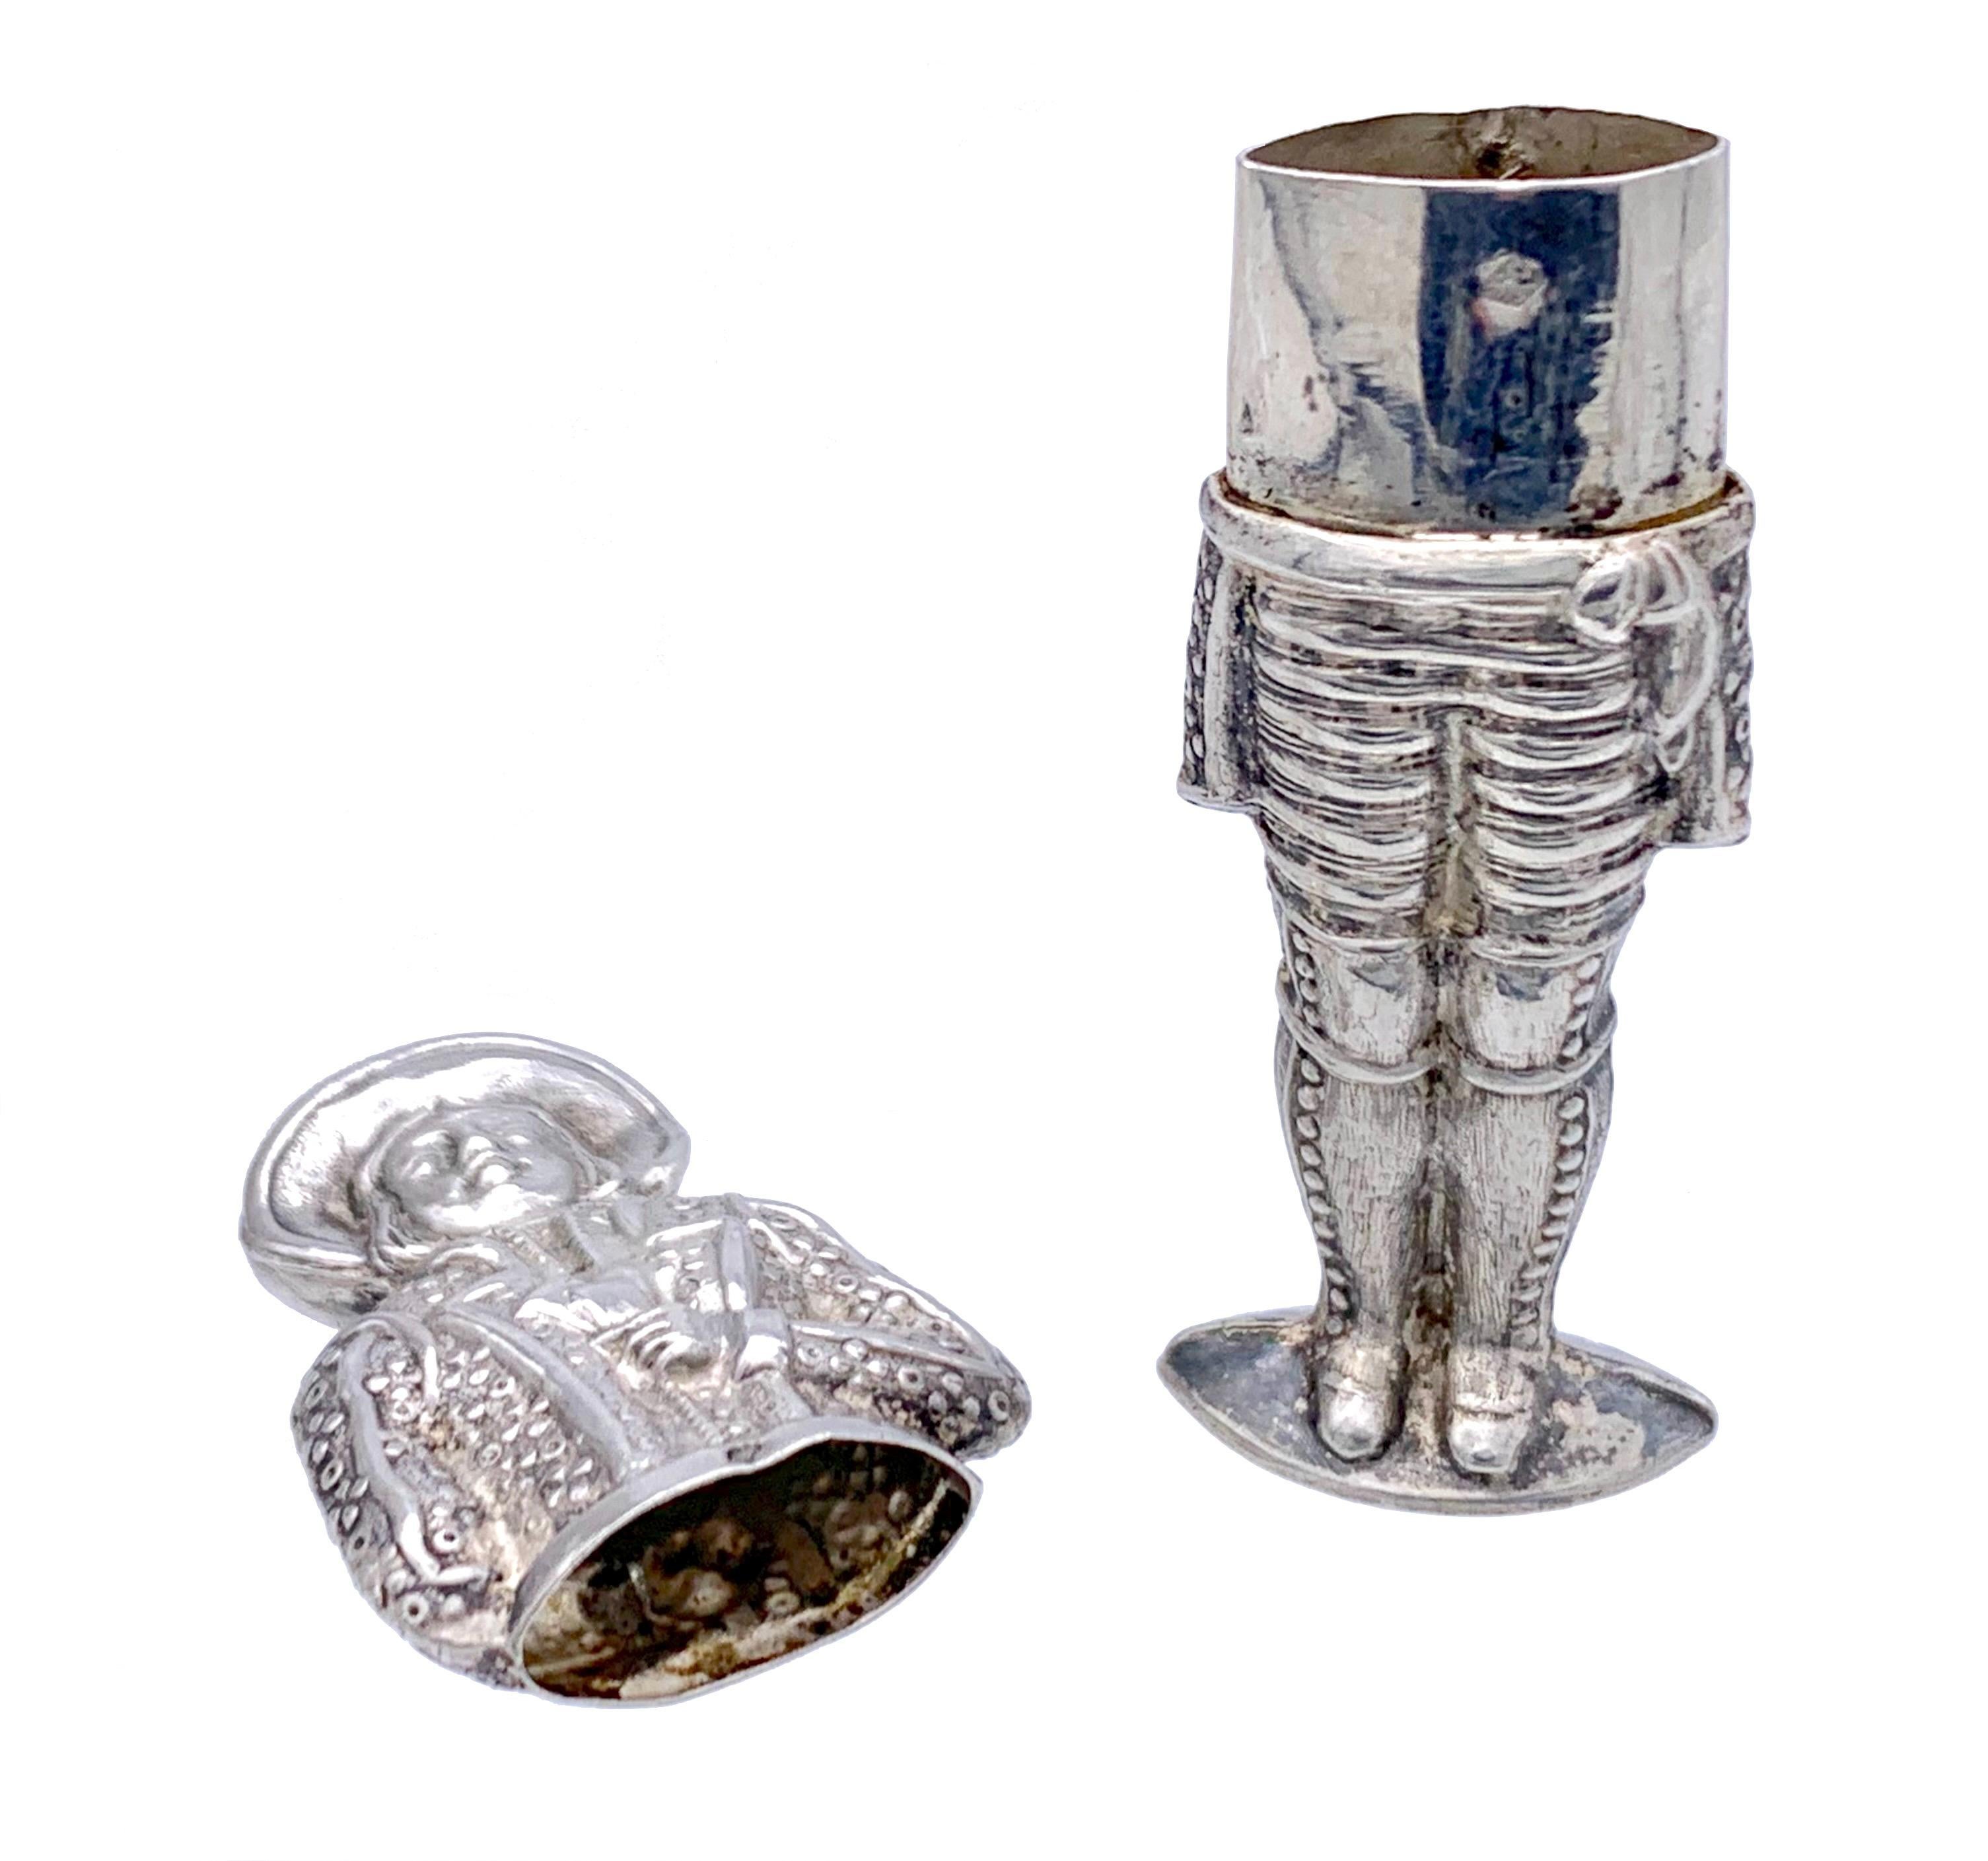 Charming silver Biedermeier needle case in the shape of a man wearing a hat, frockcoat  and gaiters. He is hiding his right hand, holding a playing card showing a diamond ace, behind his back.  